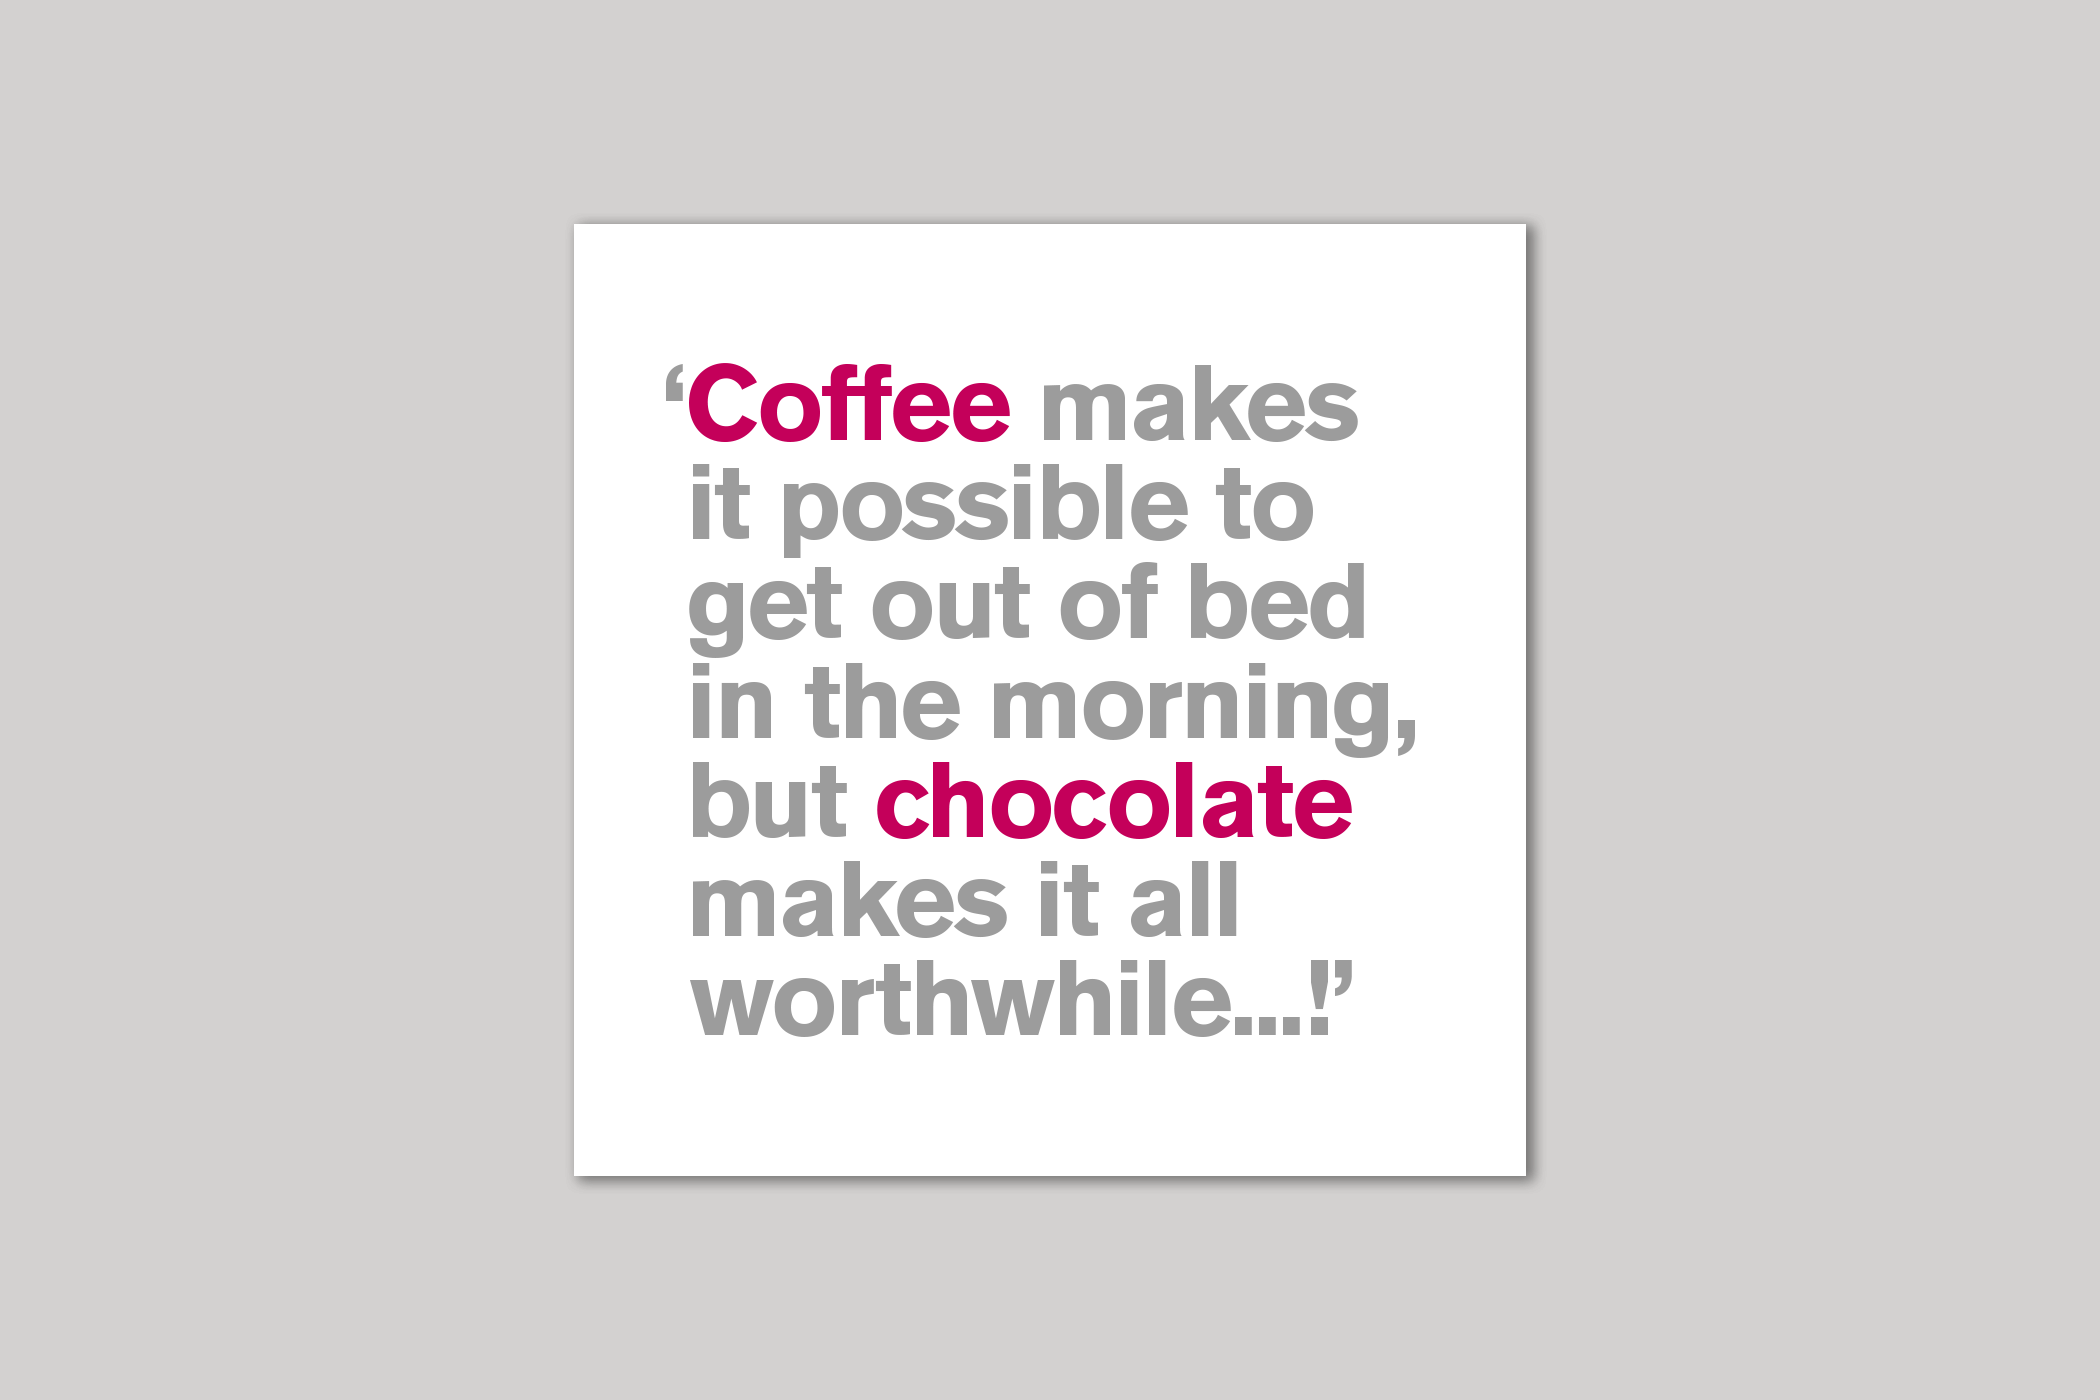 Coffee Makes it Possible from Lyric range of quotation cards by Icon.